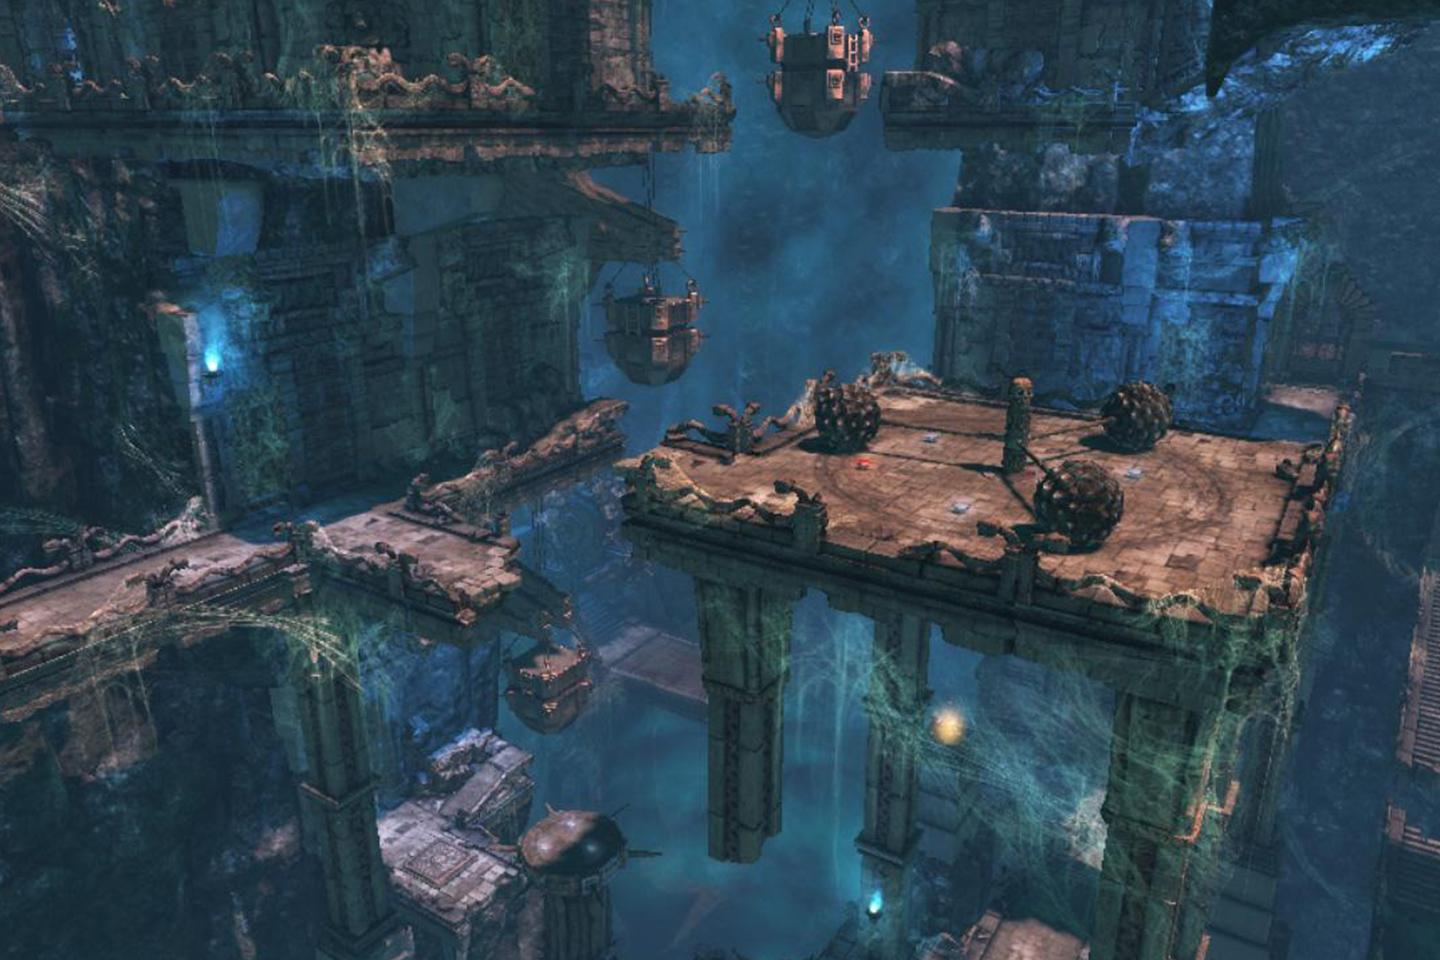 An in-game snapshot of a Tomb Raider adventure showing a suspended temple structure in a vast cave, with light beams highlighting the path forward.